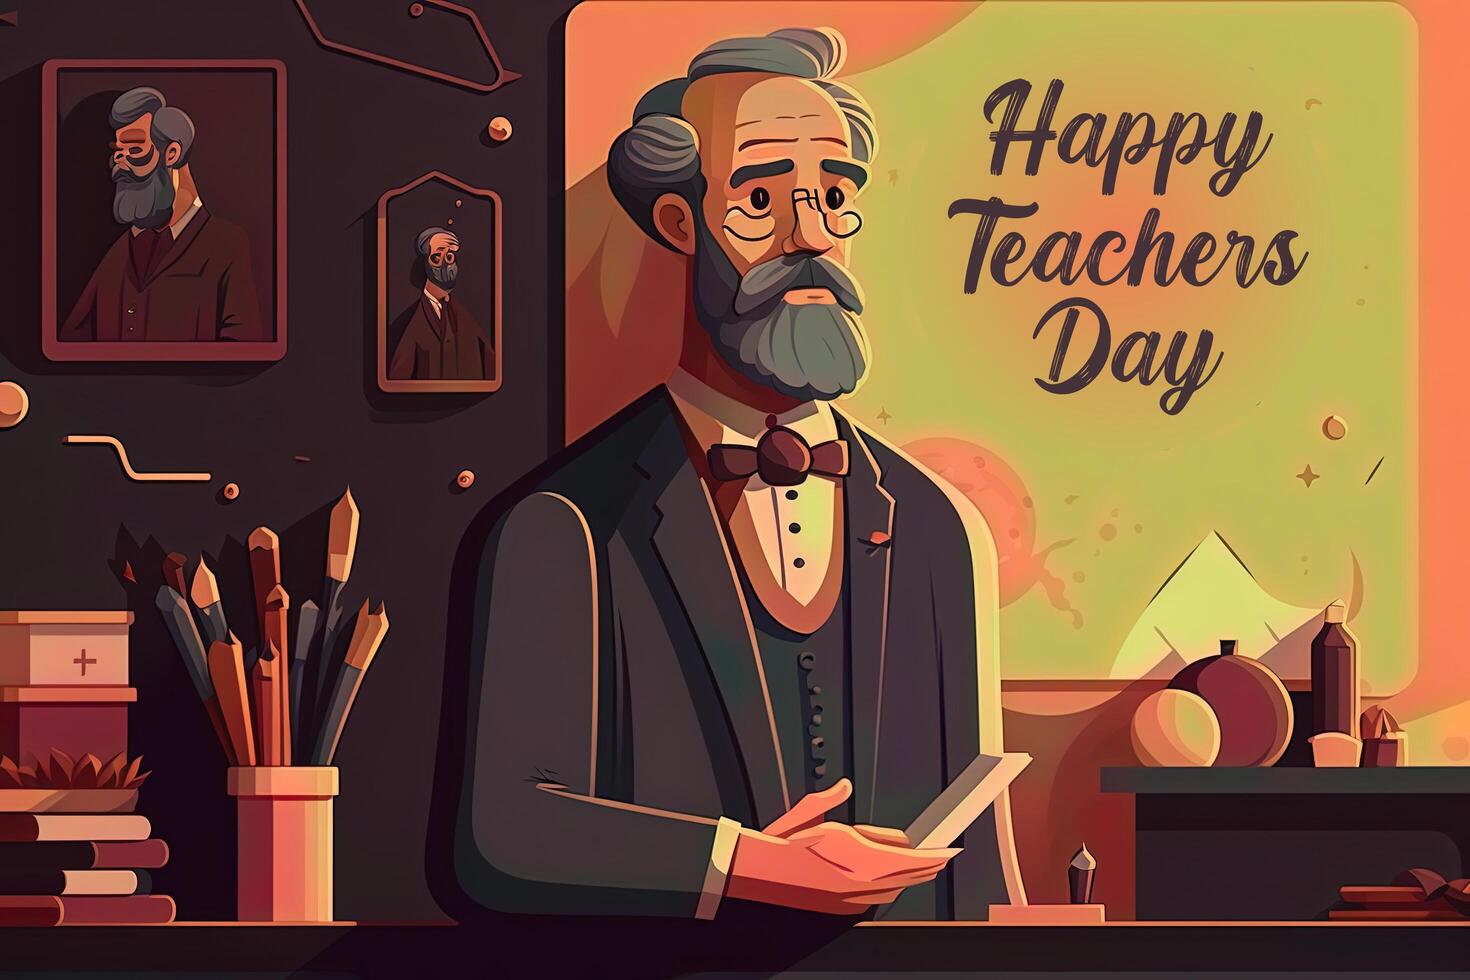 Happy teachers day illustration made with photo